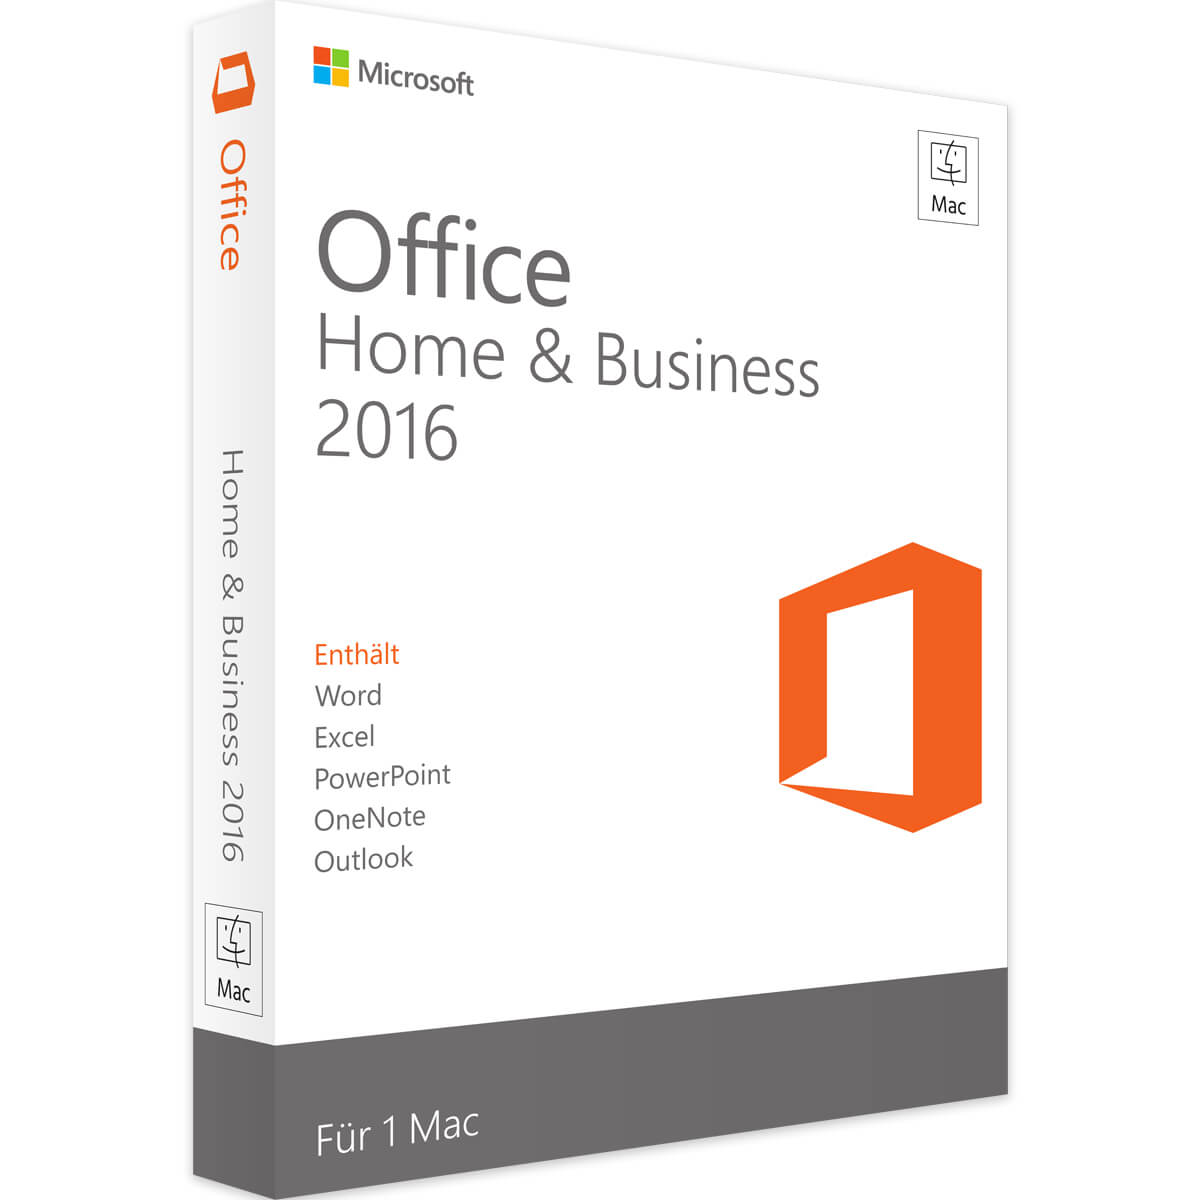 https://www.lizenzexpress.de/images/product_images/original_images/office-home-and-business-2016-mac.jpg